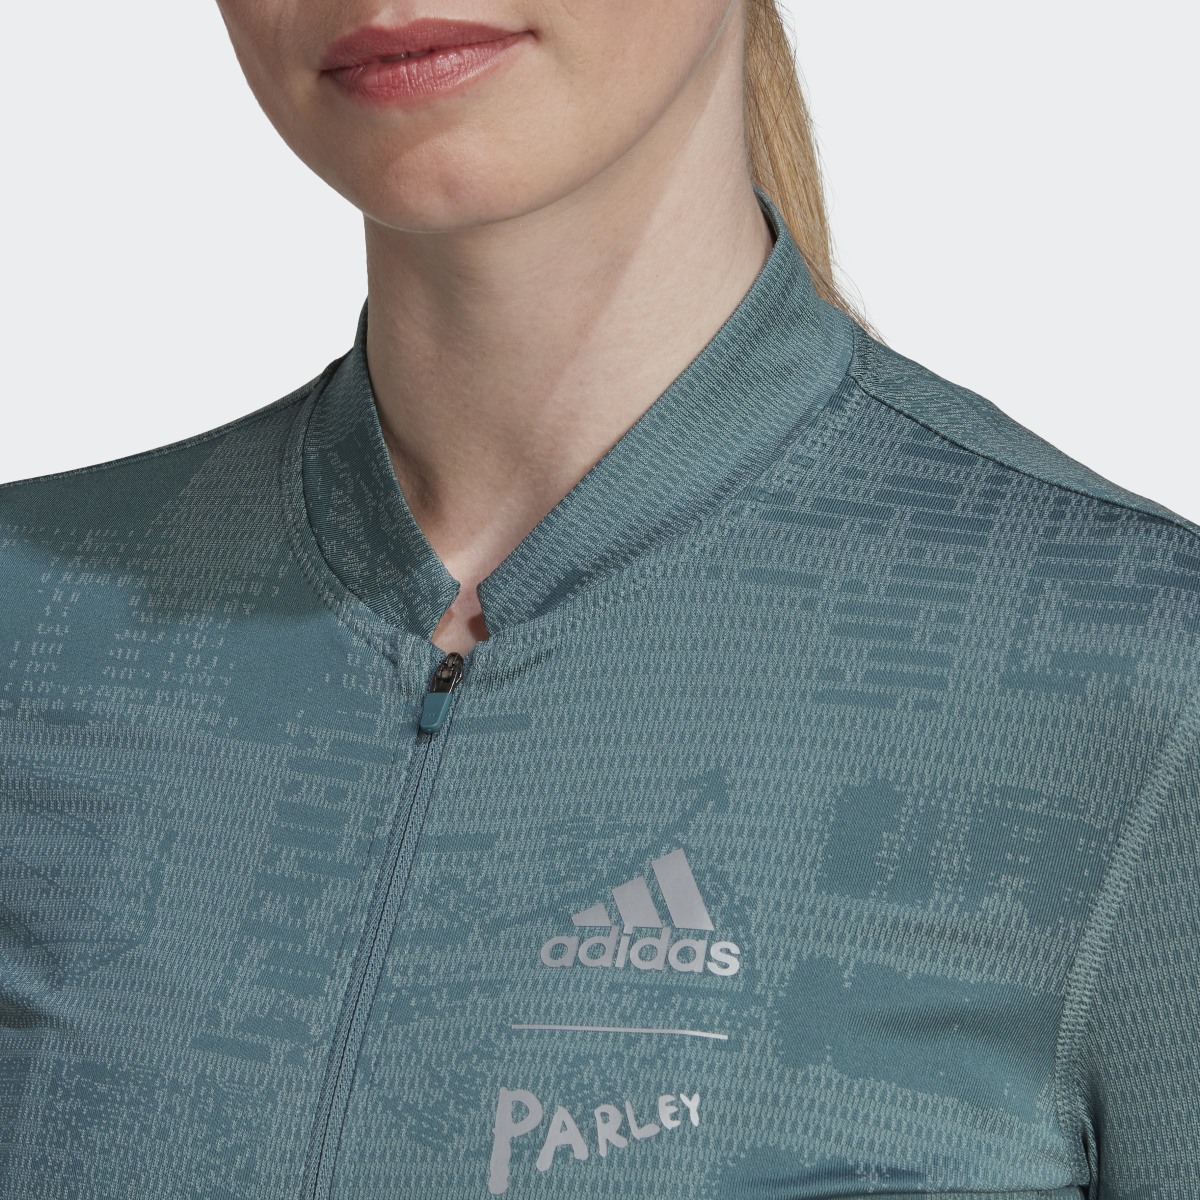 Adidas The Parley Short Sleeve Cycling Jersey. 7